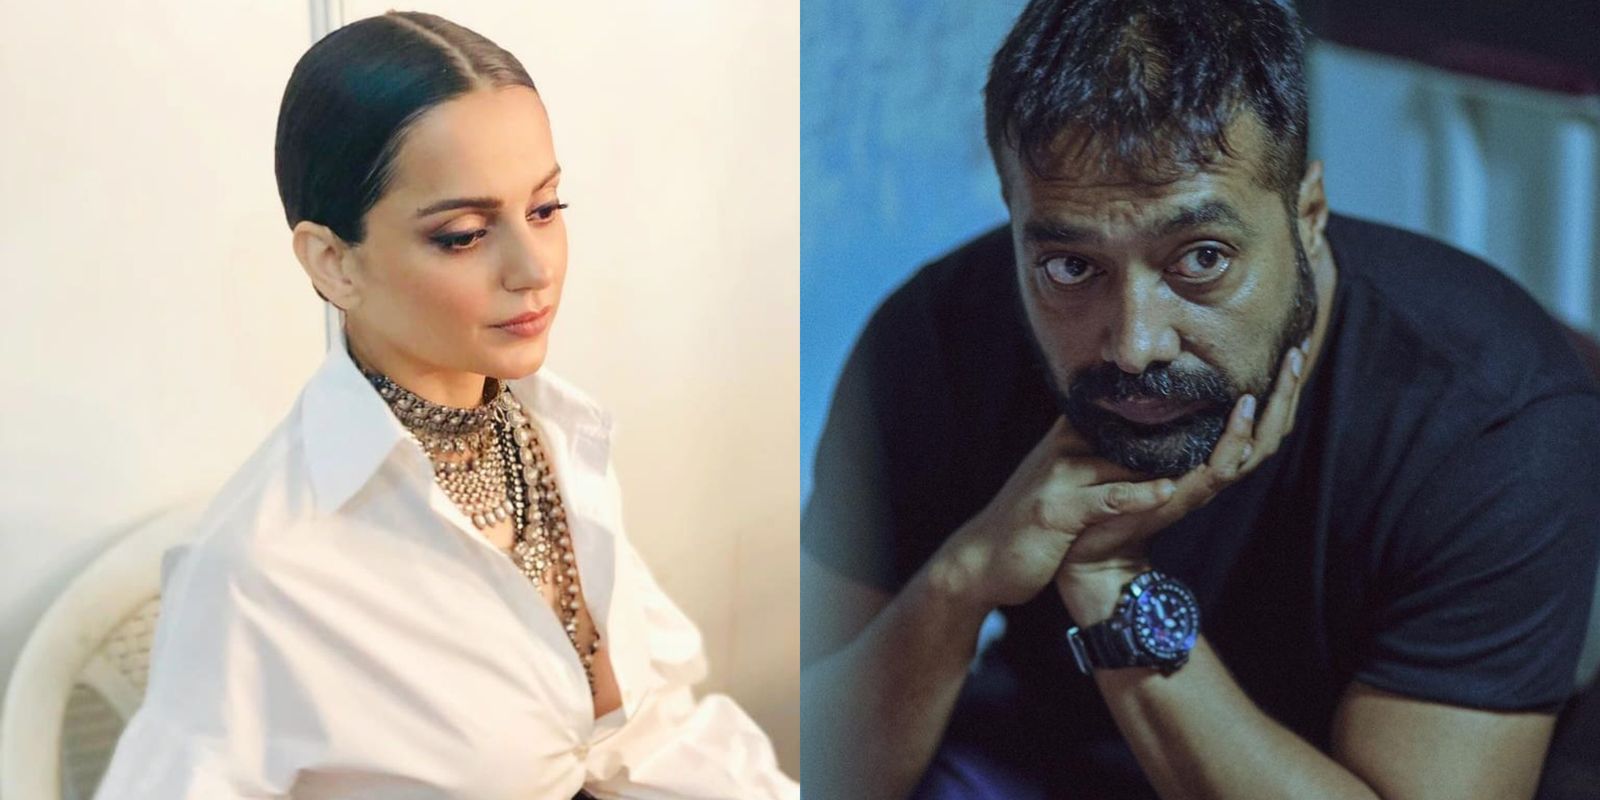 Anurag Kashyap Defines Kangana Ranaut's Current Mode As 'If You Are Not With Me You Are My Enemy’